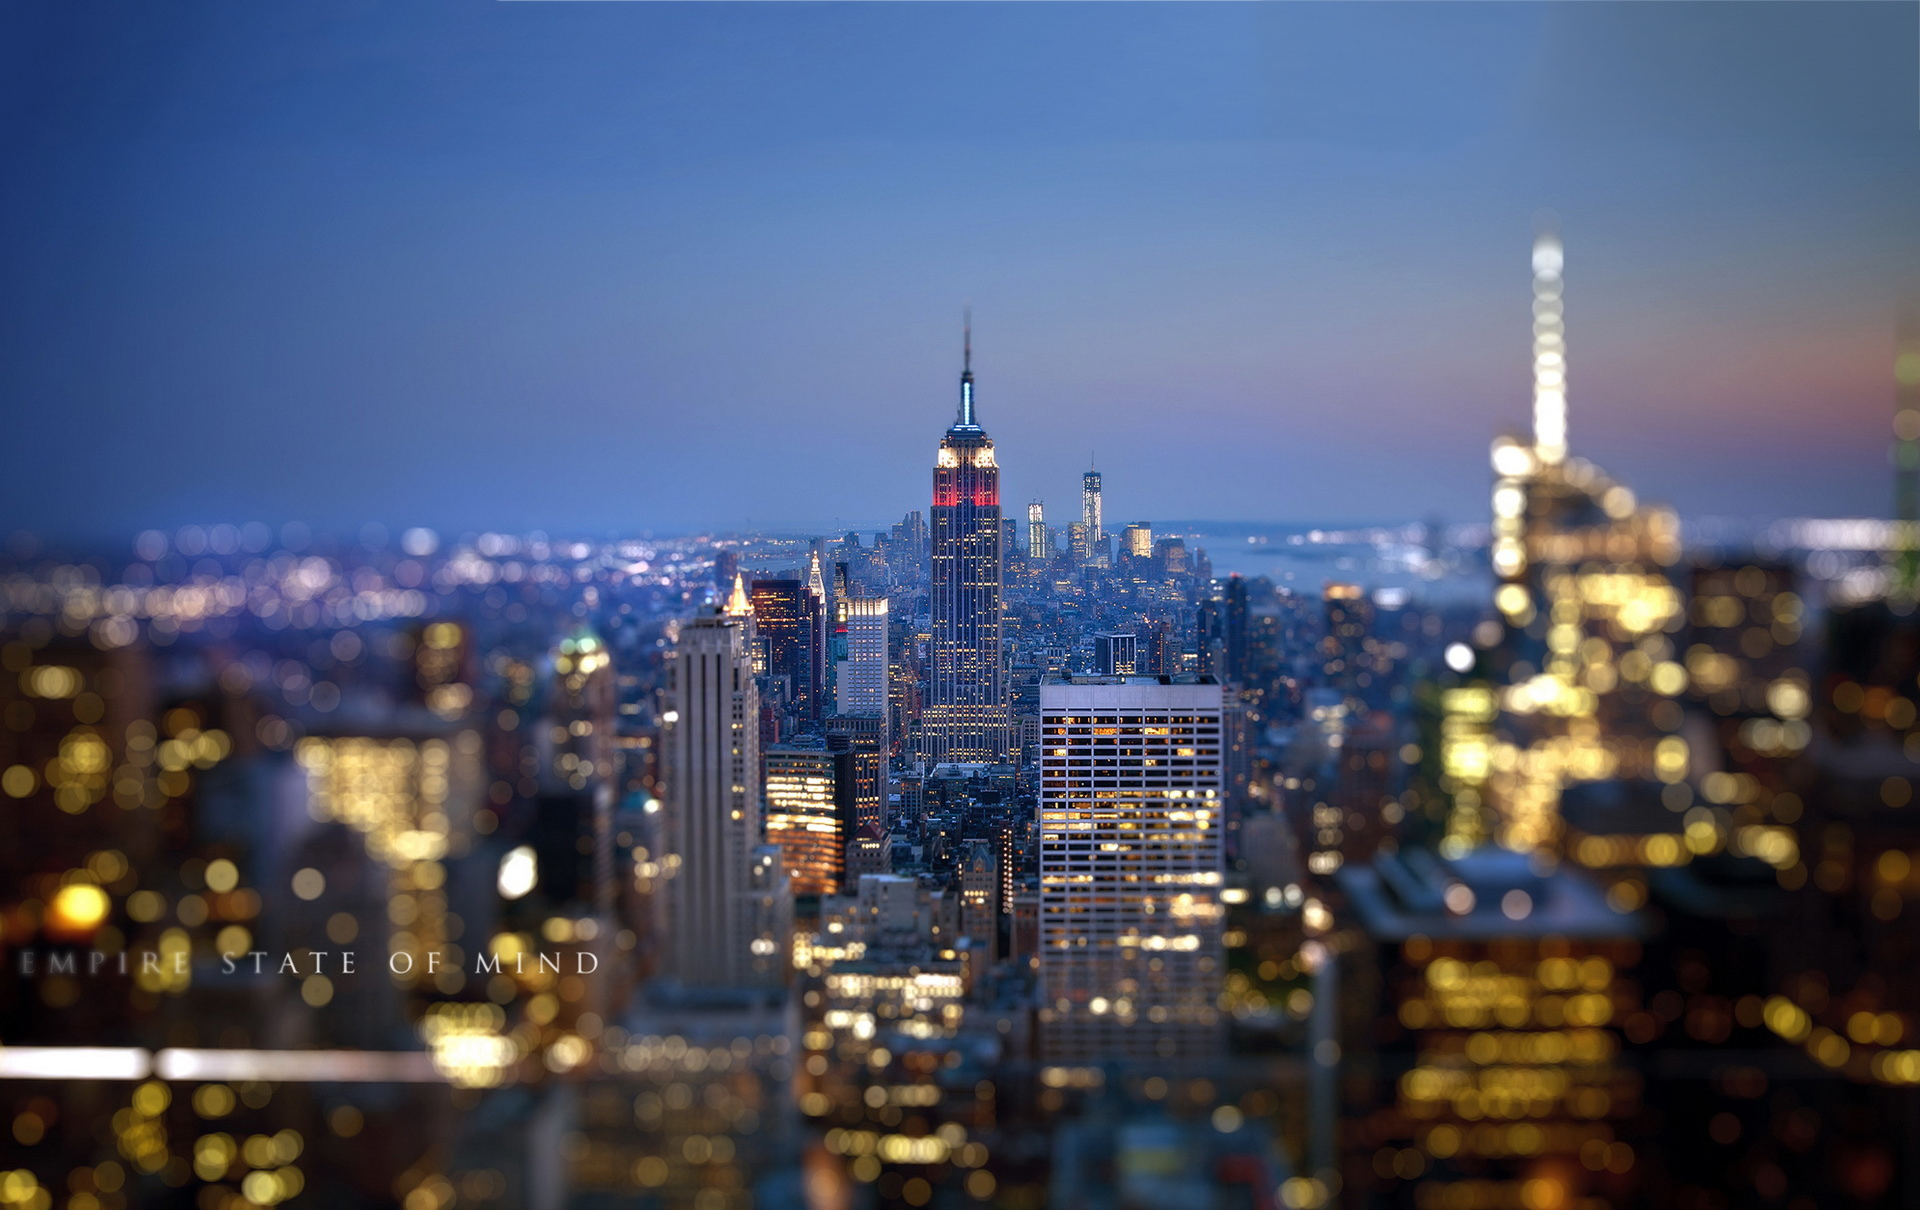 35 EMPIRE STATE OF MIND 1238 :: Empire State Building Hd Wallpapers